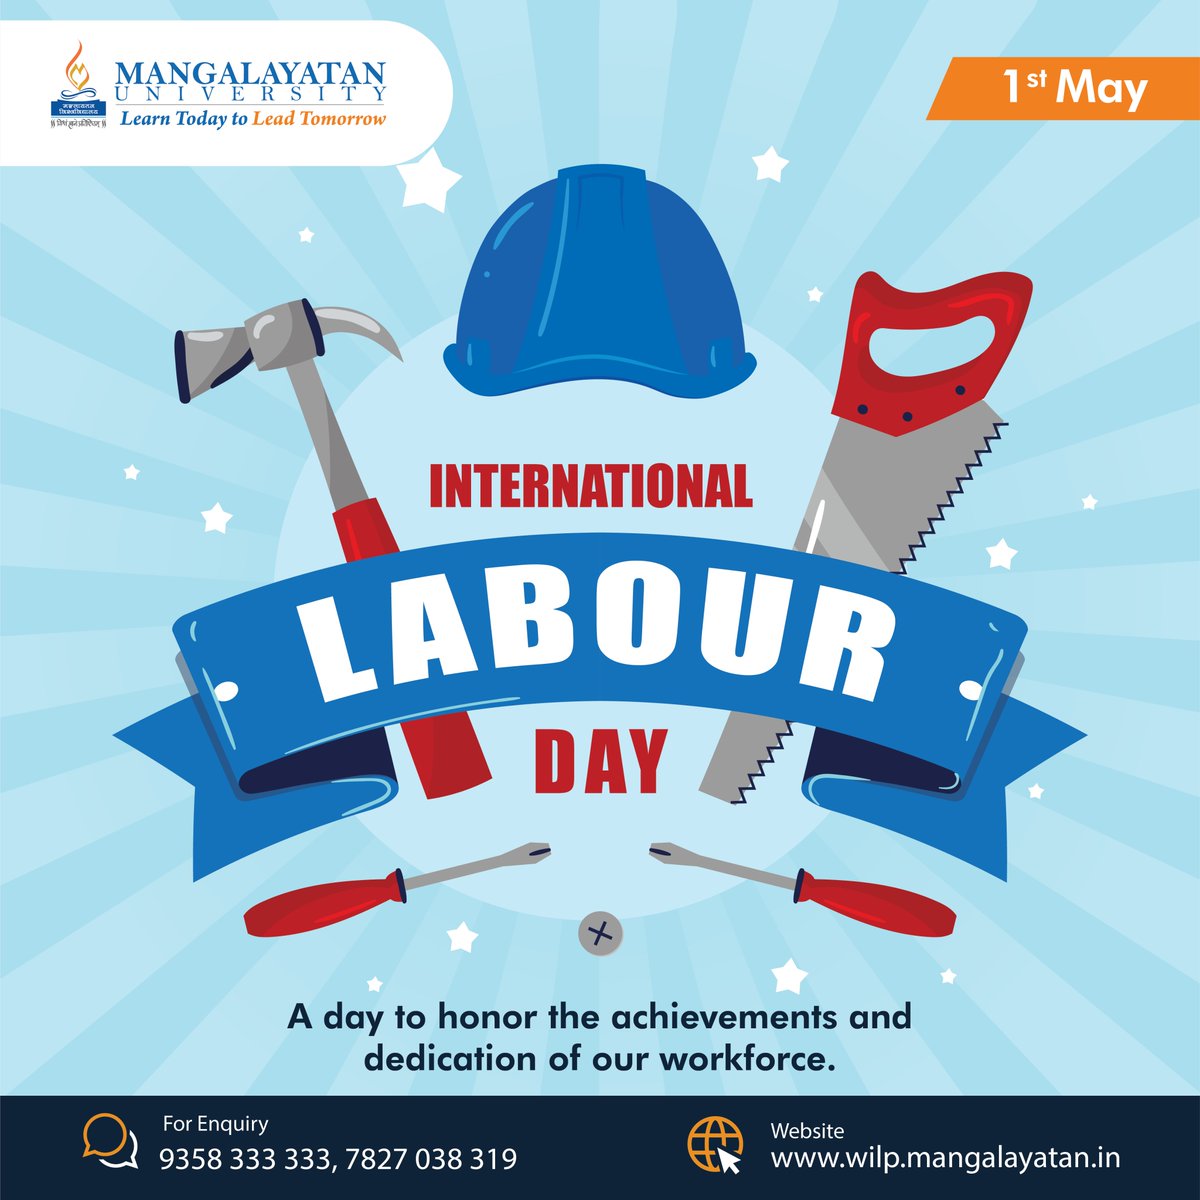 Let’s celebrate the strength and resilience of workers on Labour Day!
#internationallabourday #labourday #workersday #happylabourday #internationalworkersday #holisticdevelopment #qualityeducation #mangalayatanuniversity #bestuniversity #admissionopen2024 #enrollnow